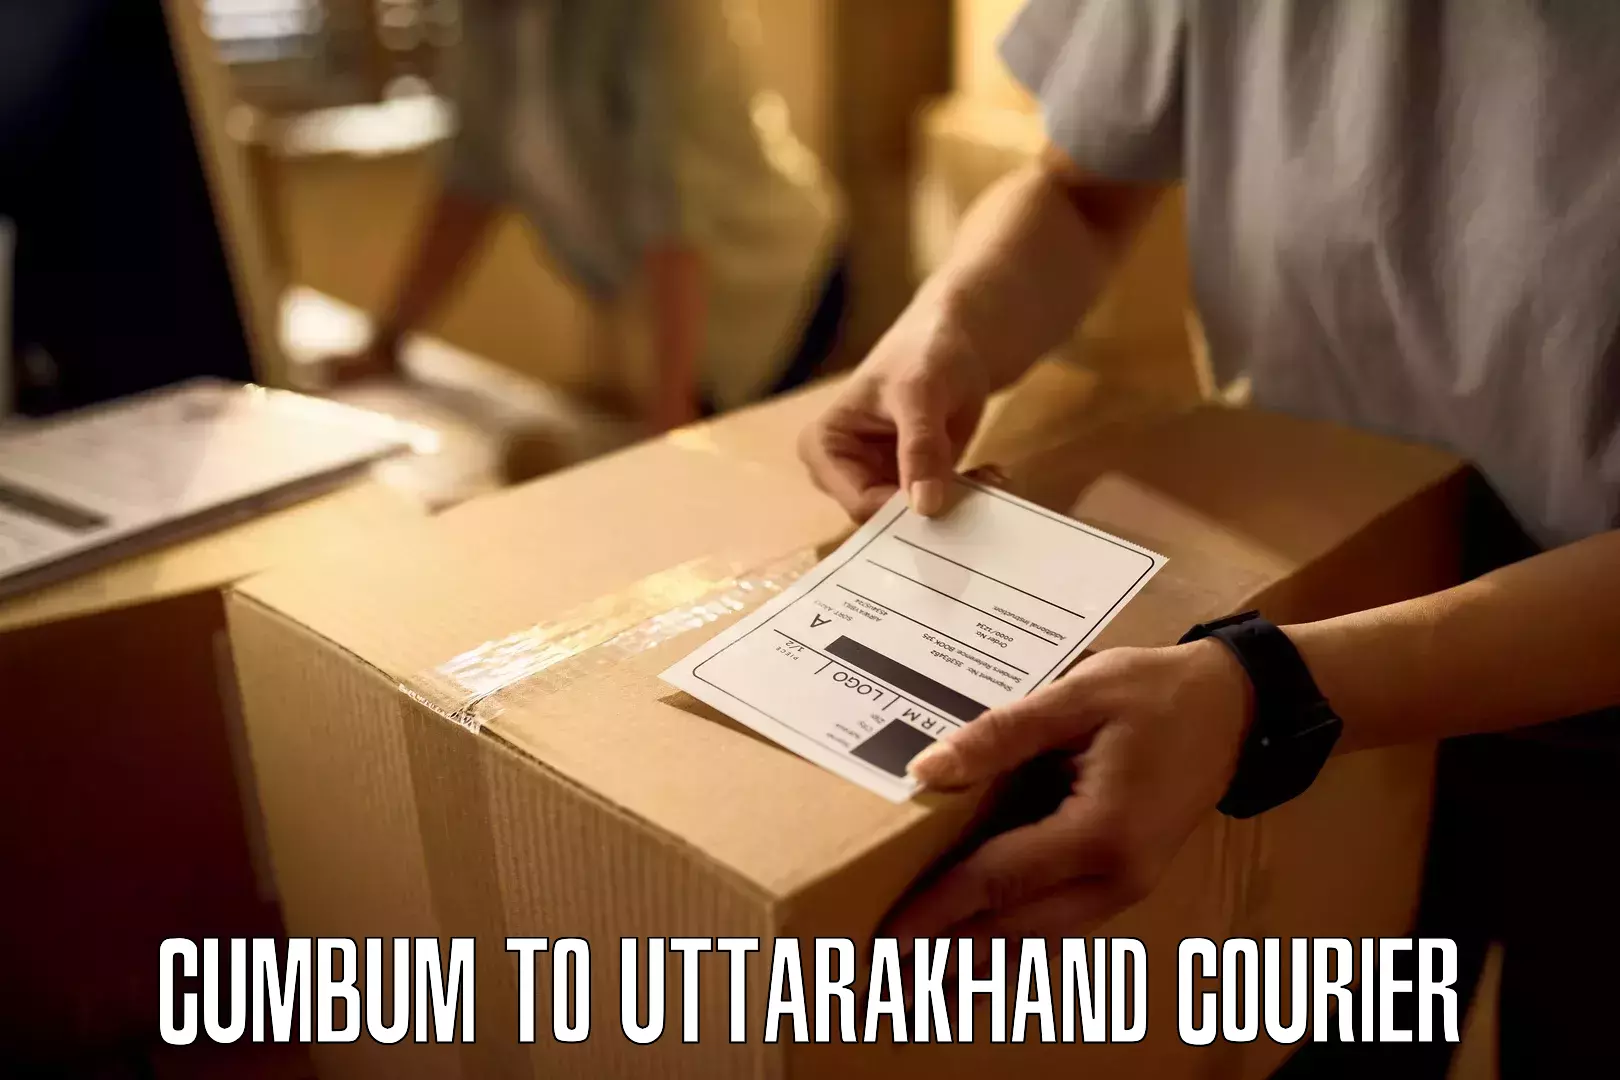 Personal courier services Cumbum to Uttarakhand